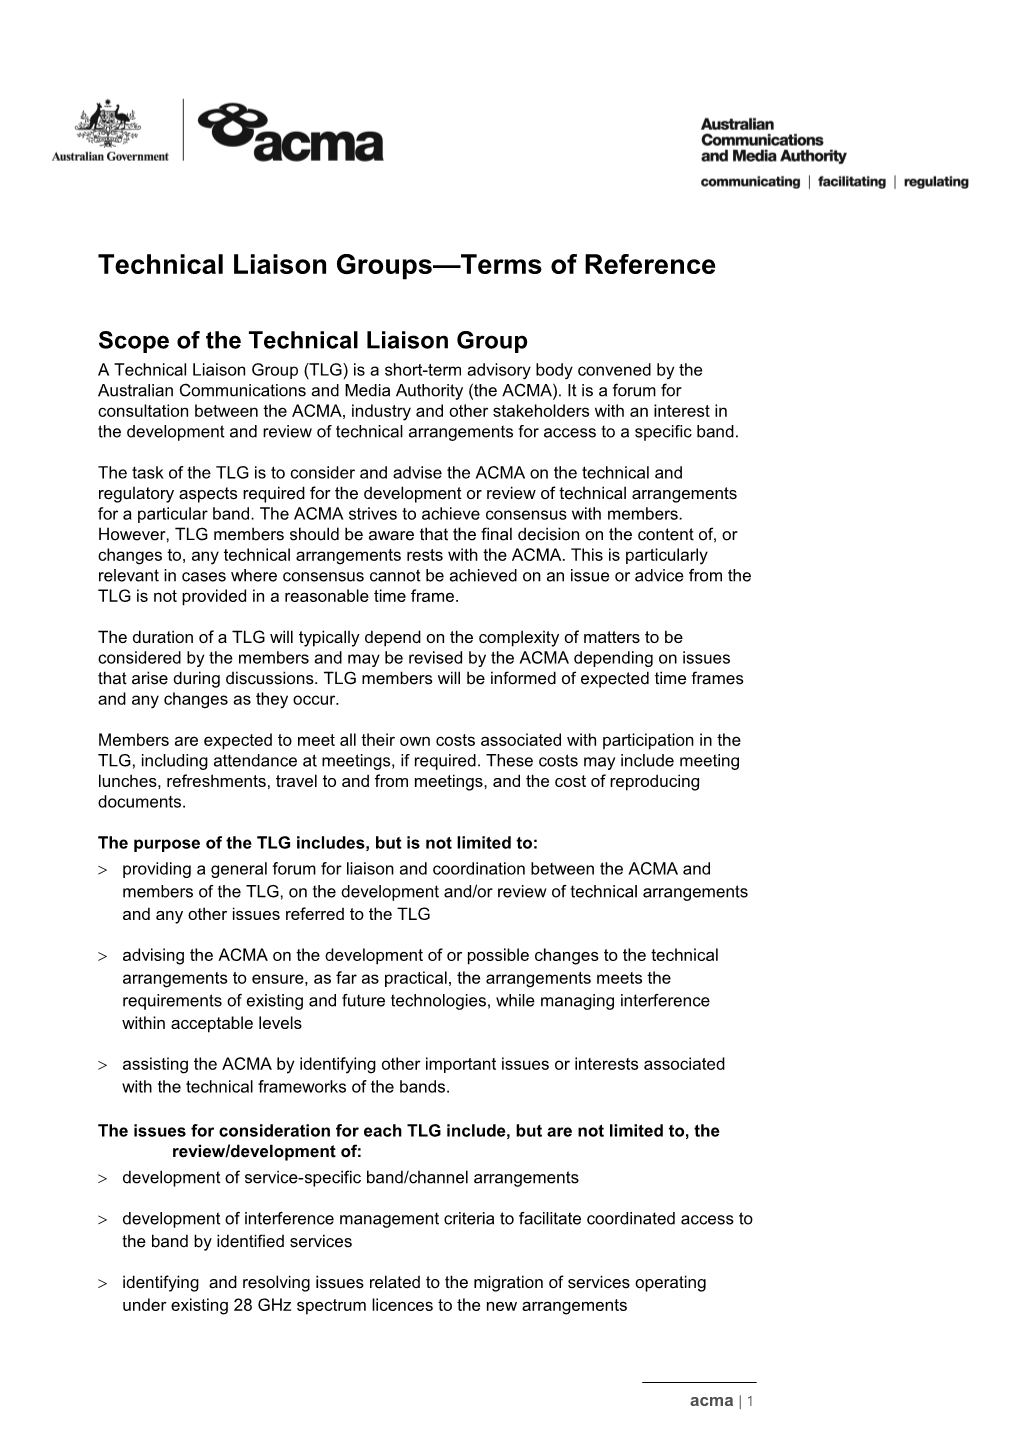 Technical Liaison Groups Terms of Reference